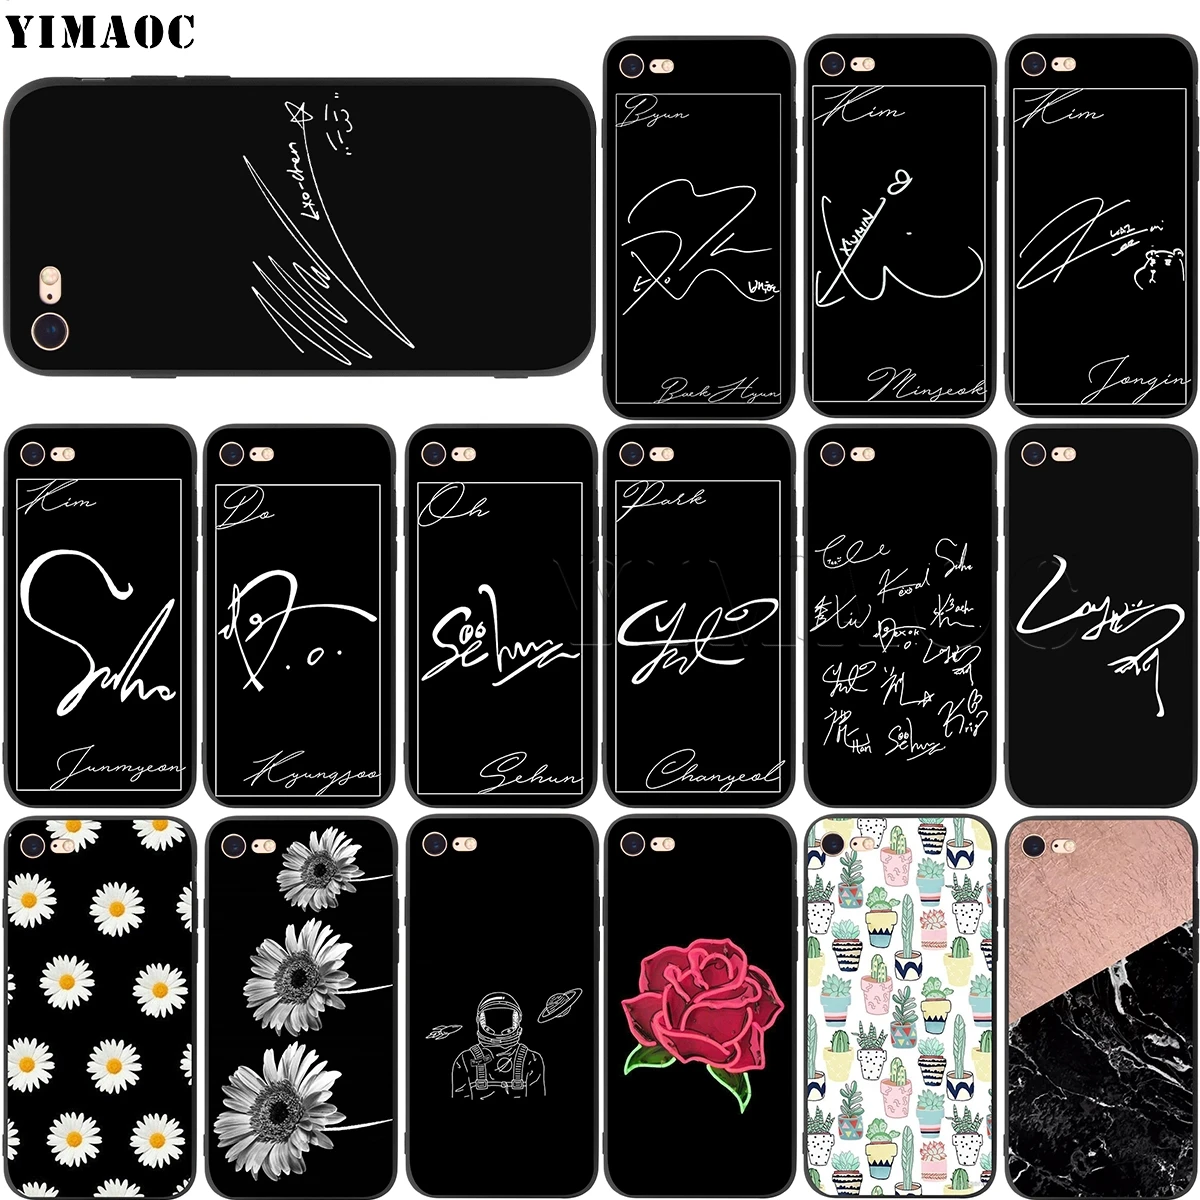 

YIMAOC EXO Chen Chanyeol Signature Soft Silicone Case for iPhone 11 Pro XS Max XR X 8 7 6 6S Plus 5 5s se